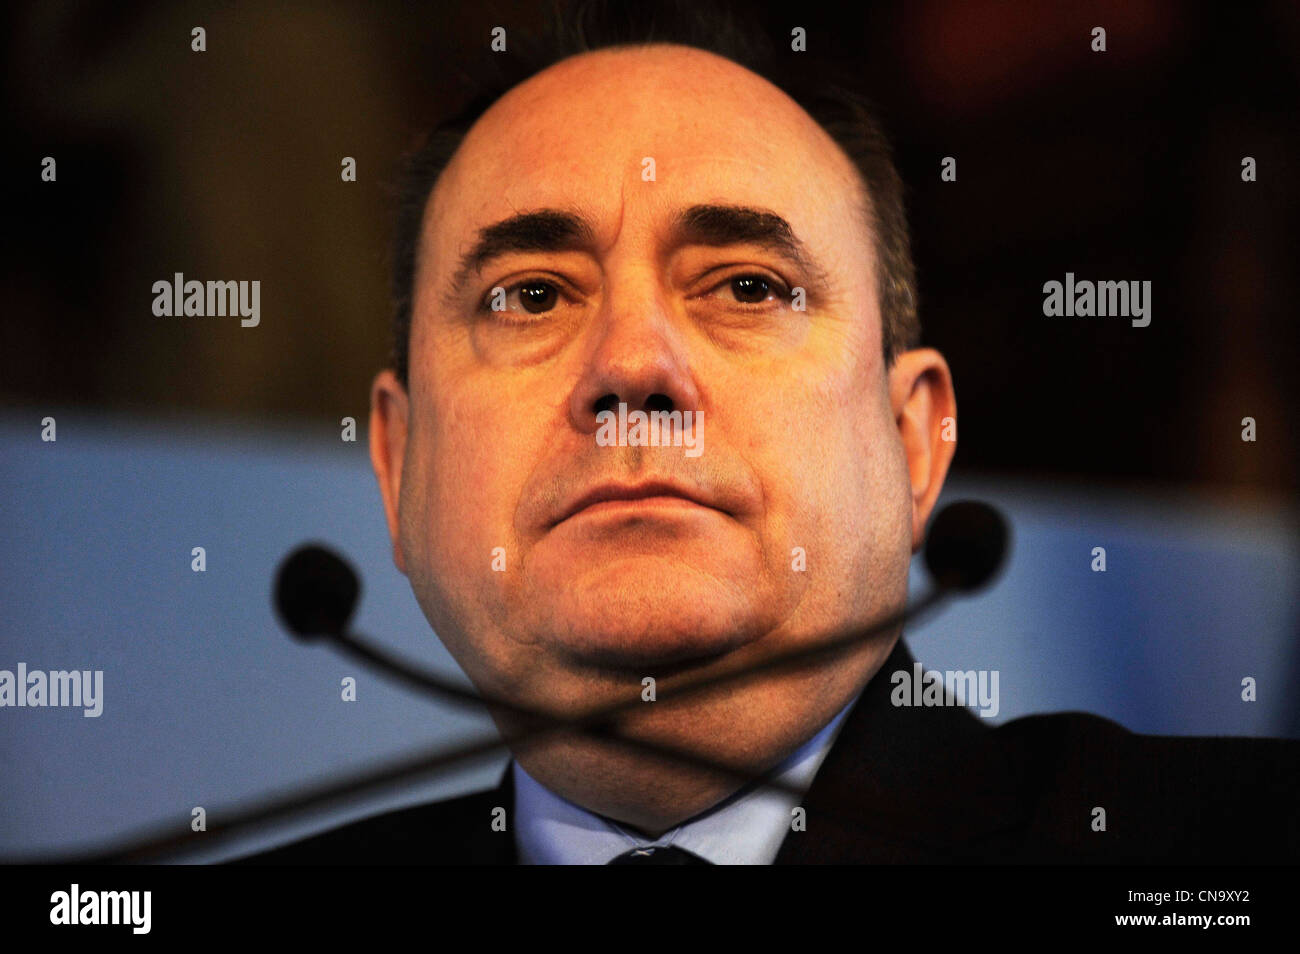 Scottish First Minister Alex Salmond launches the SNP plans for a referendum on Scottish Independence at Edinburgh Castle. Stock Photo